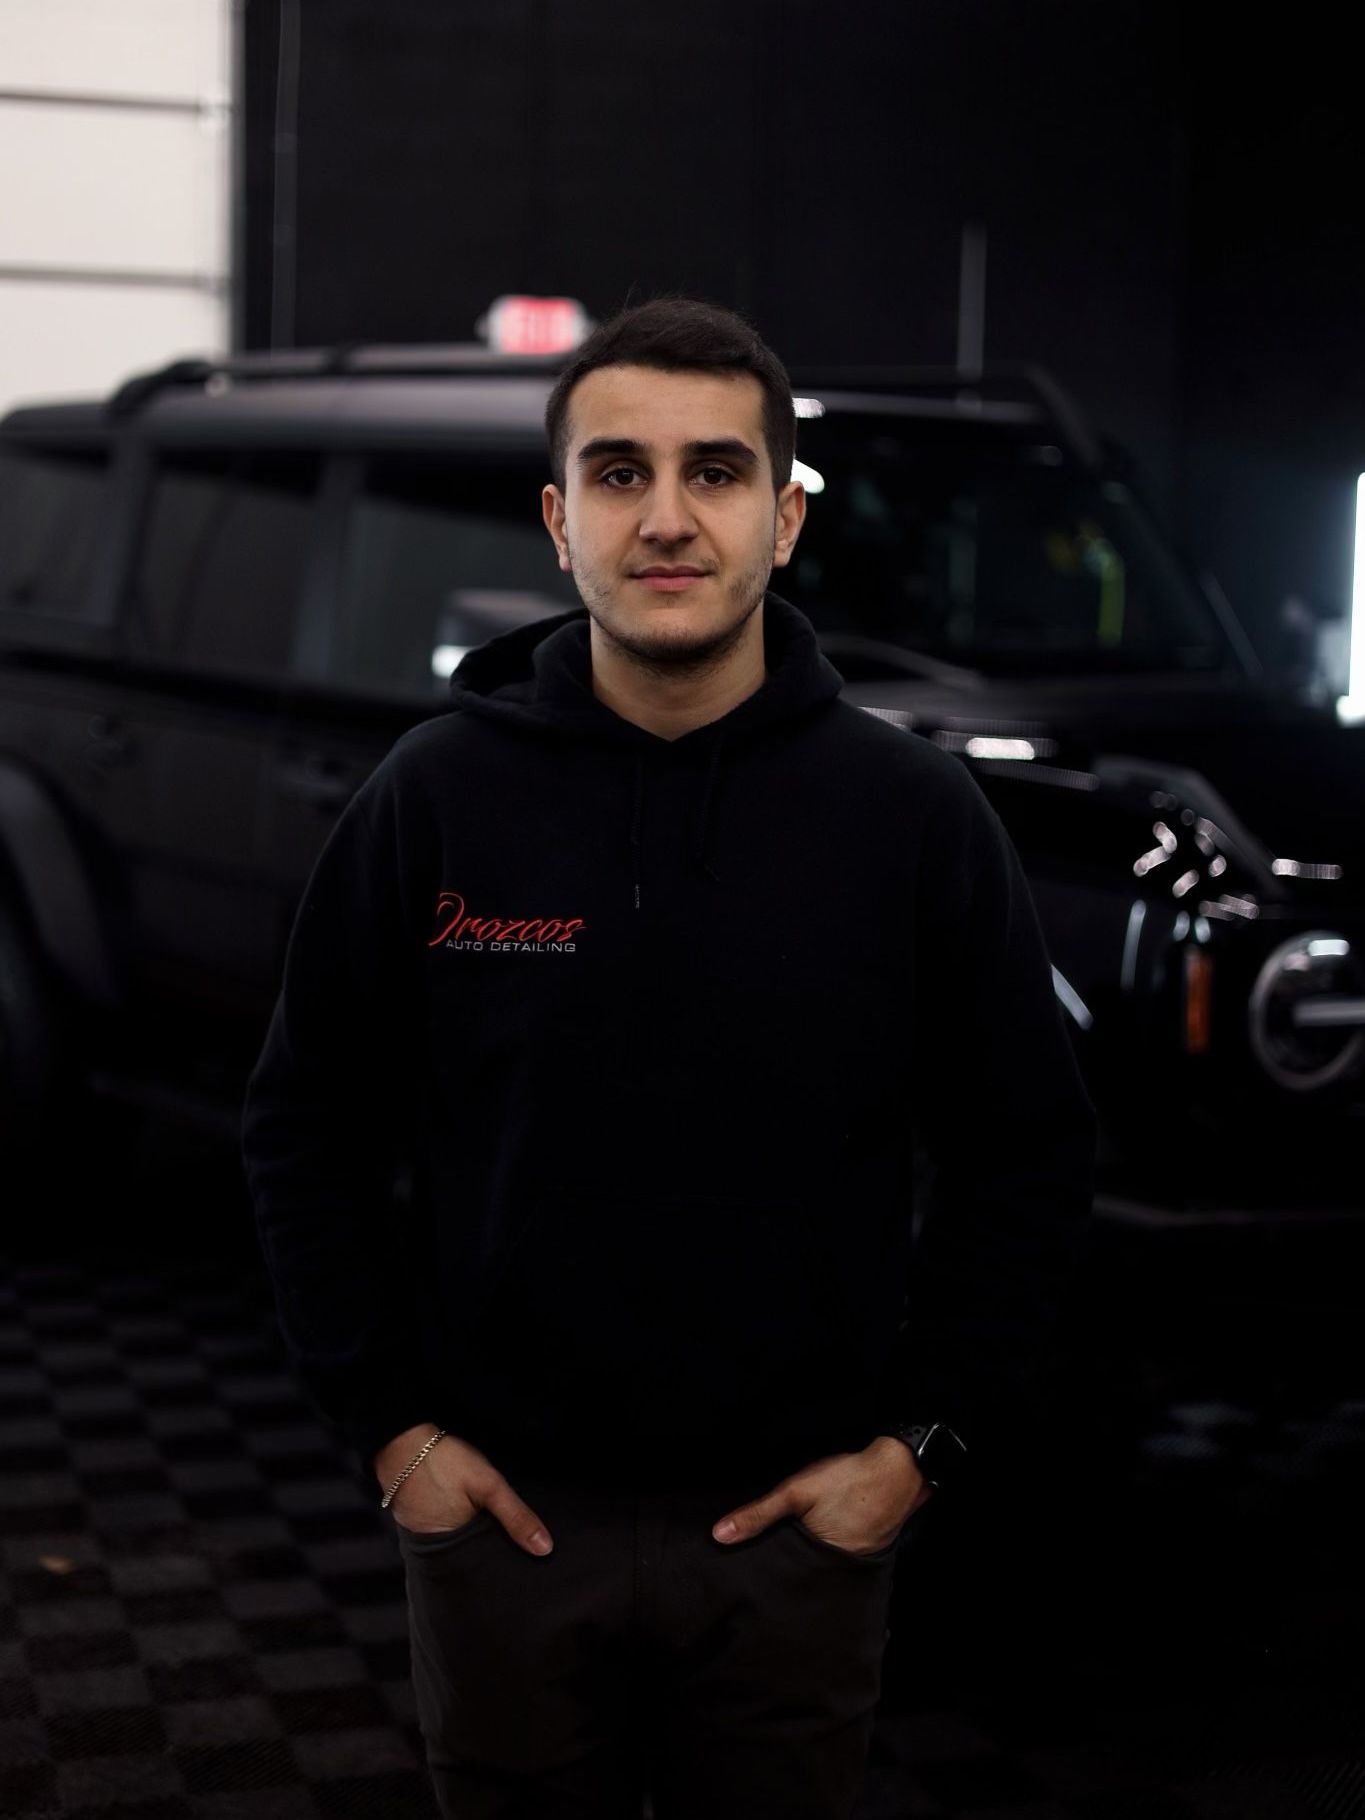 A man in a black hoodie is standing in front of a black car.